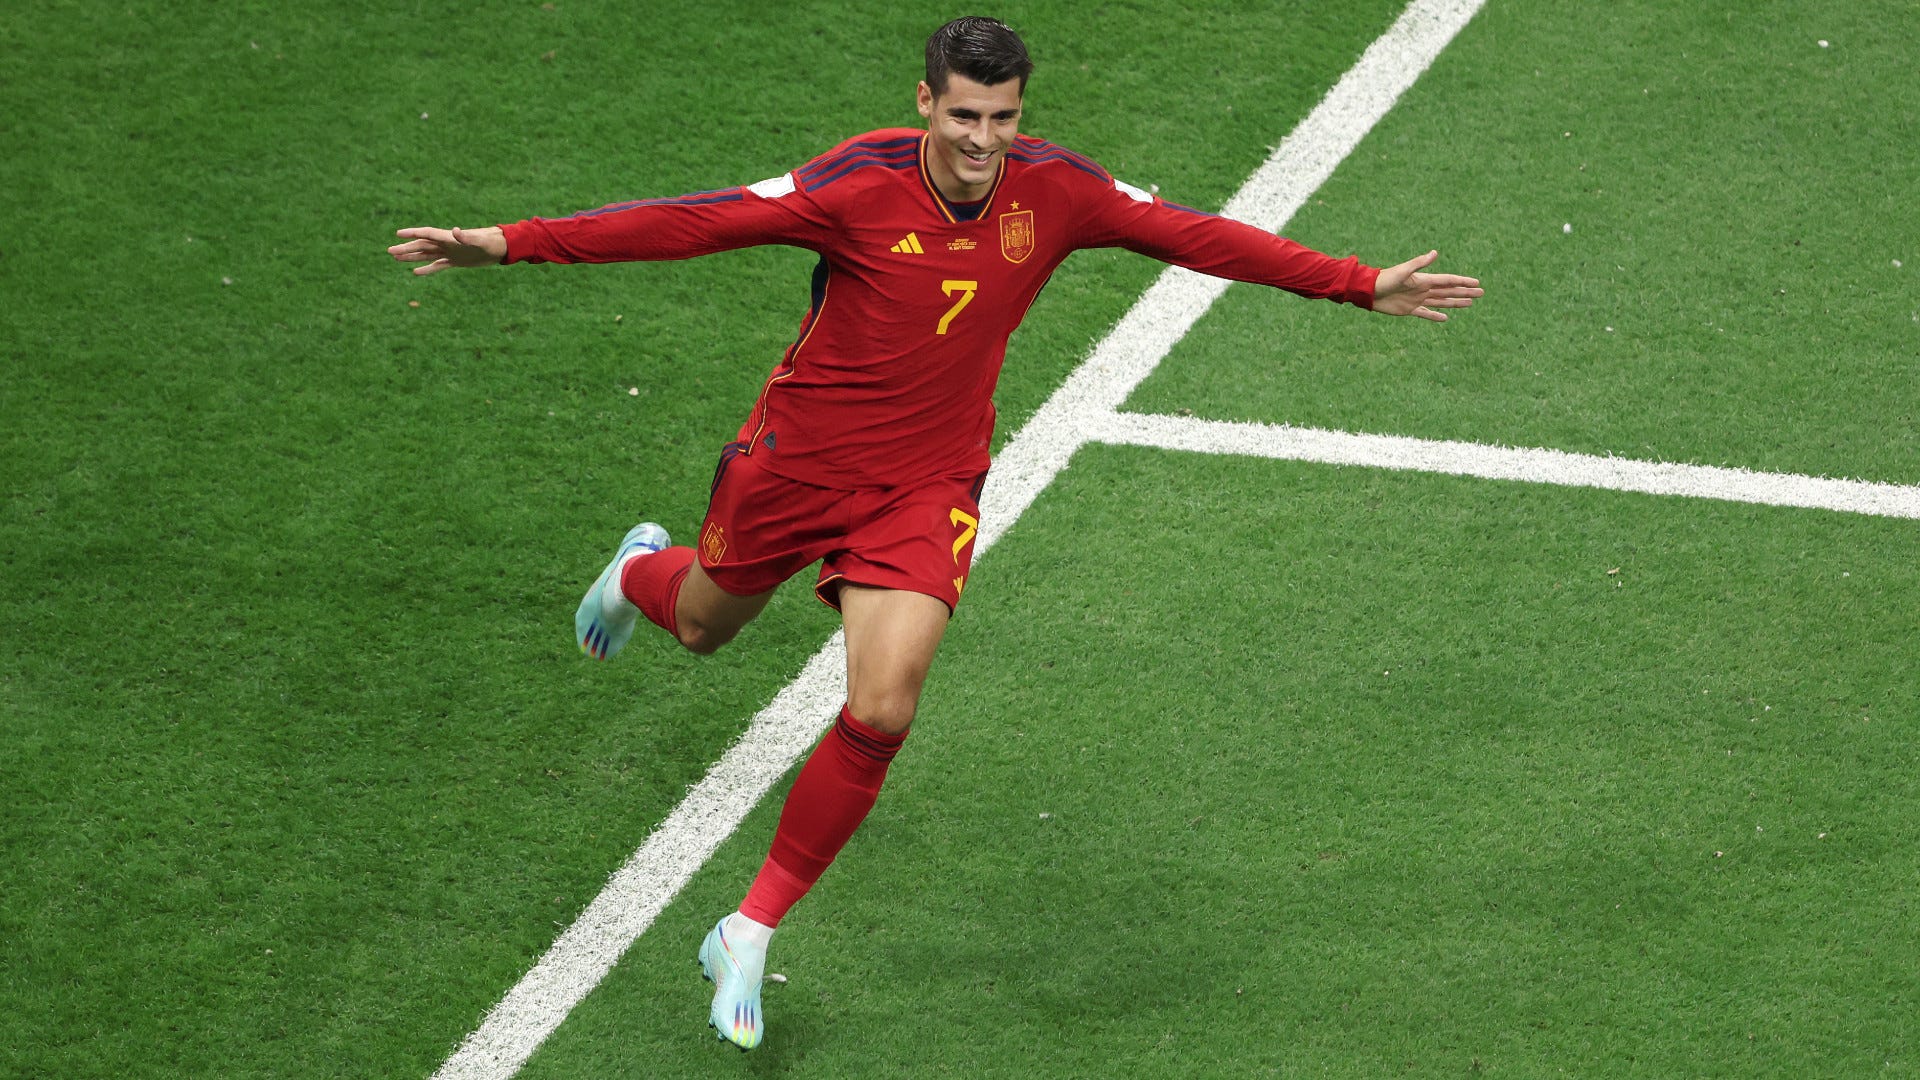 WATCH: Super-sub Morata produces clever finish from delightful Olmo pass to  put Spain in front vs Germany  India